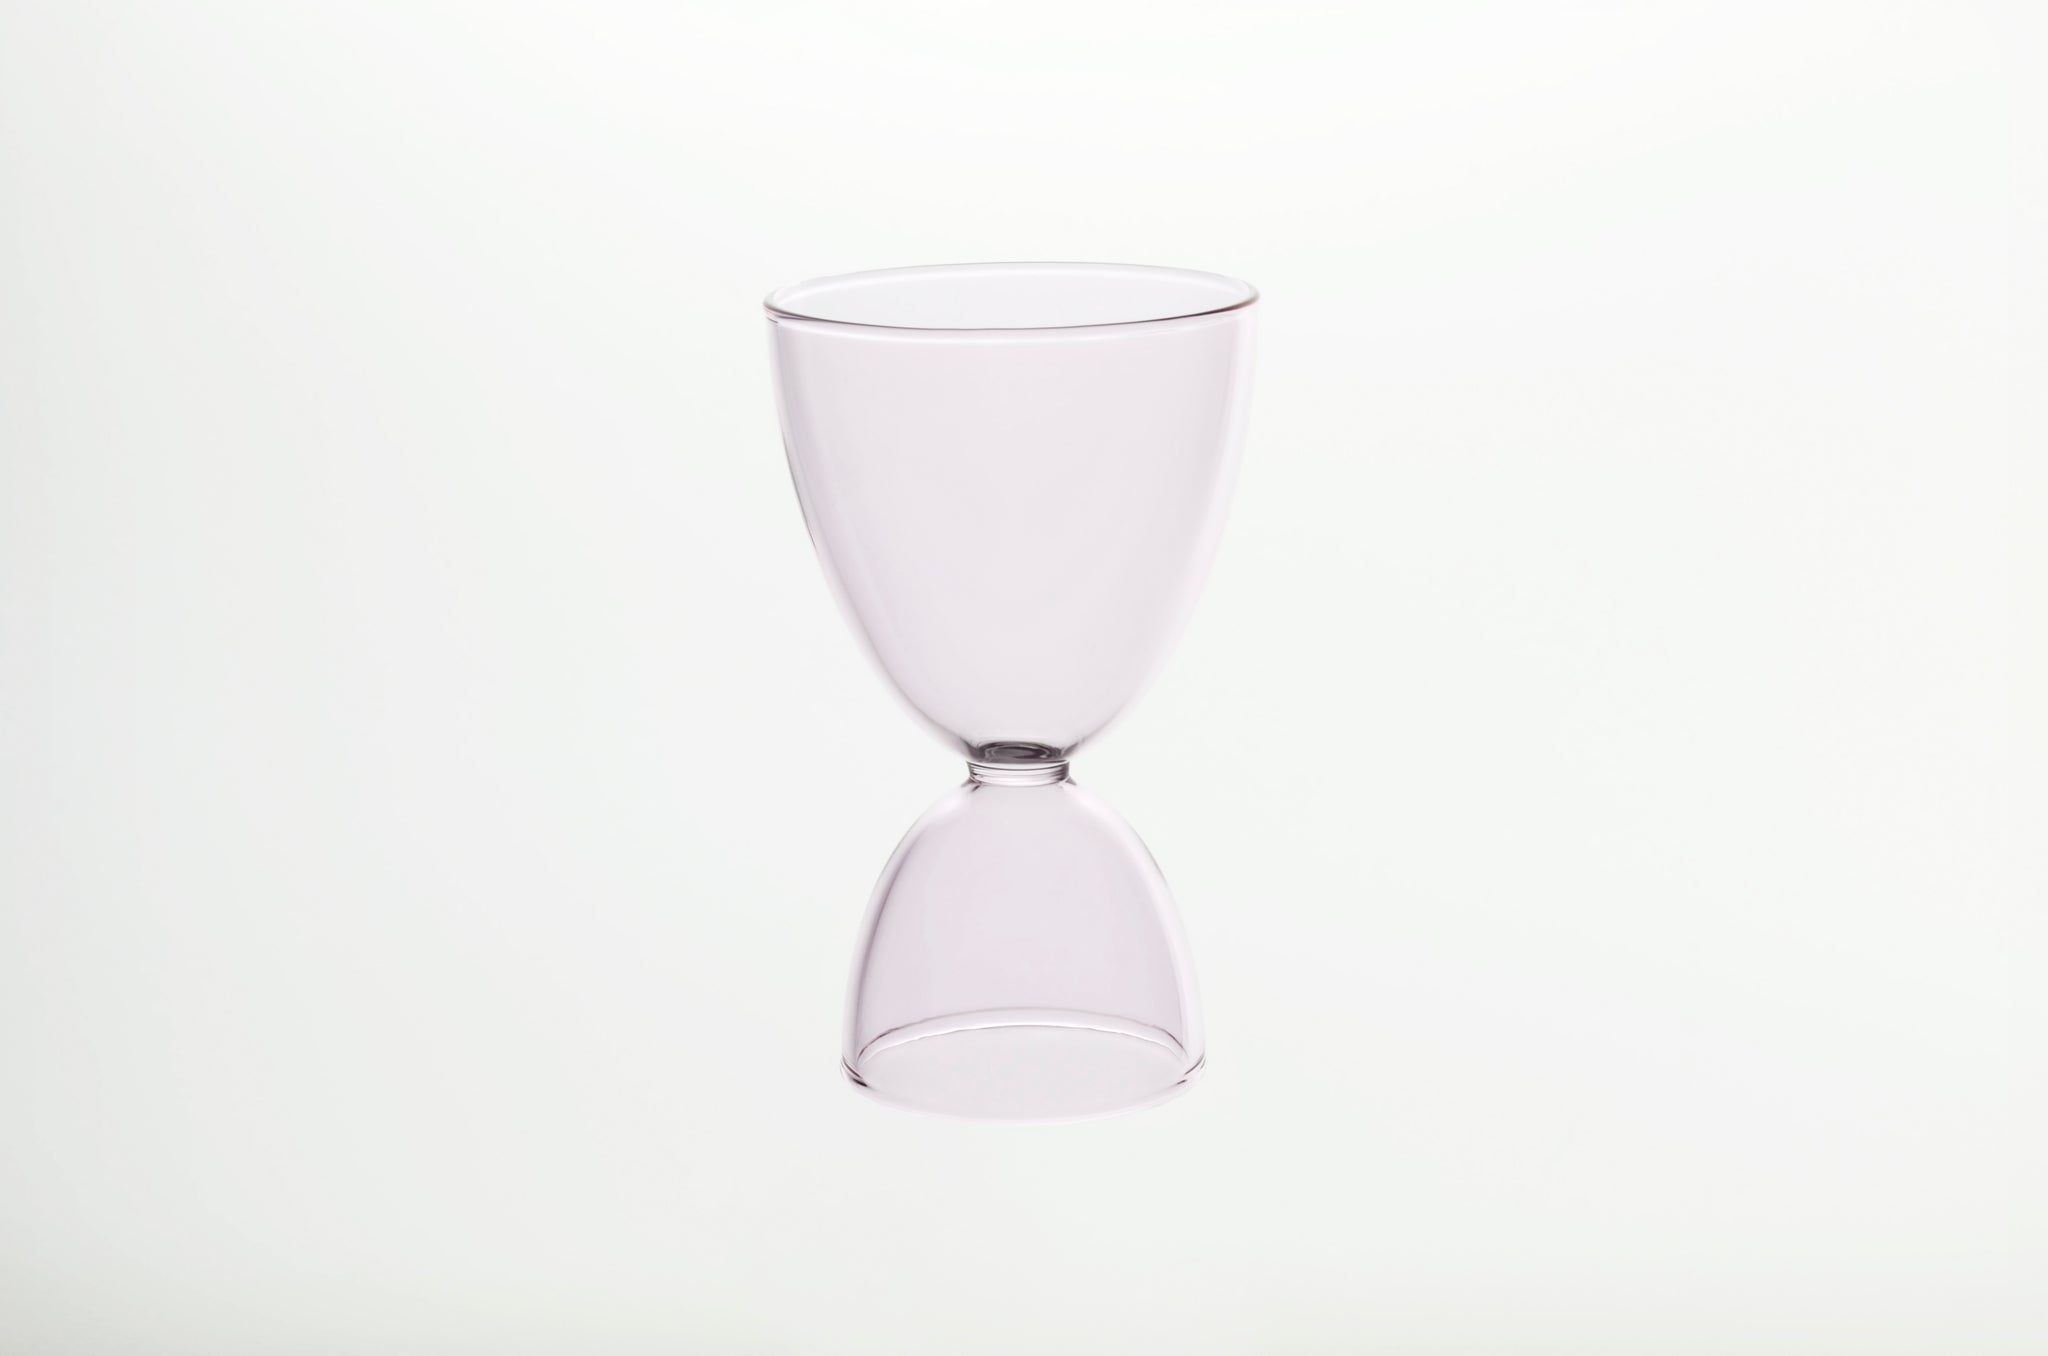 https://cdn.shopify.com/s/files/1/0549/1143/4842/products/elysian-collective-mamo-pink-cocktailglass_2048x2048.jpg?v=1663278814